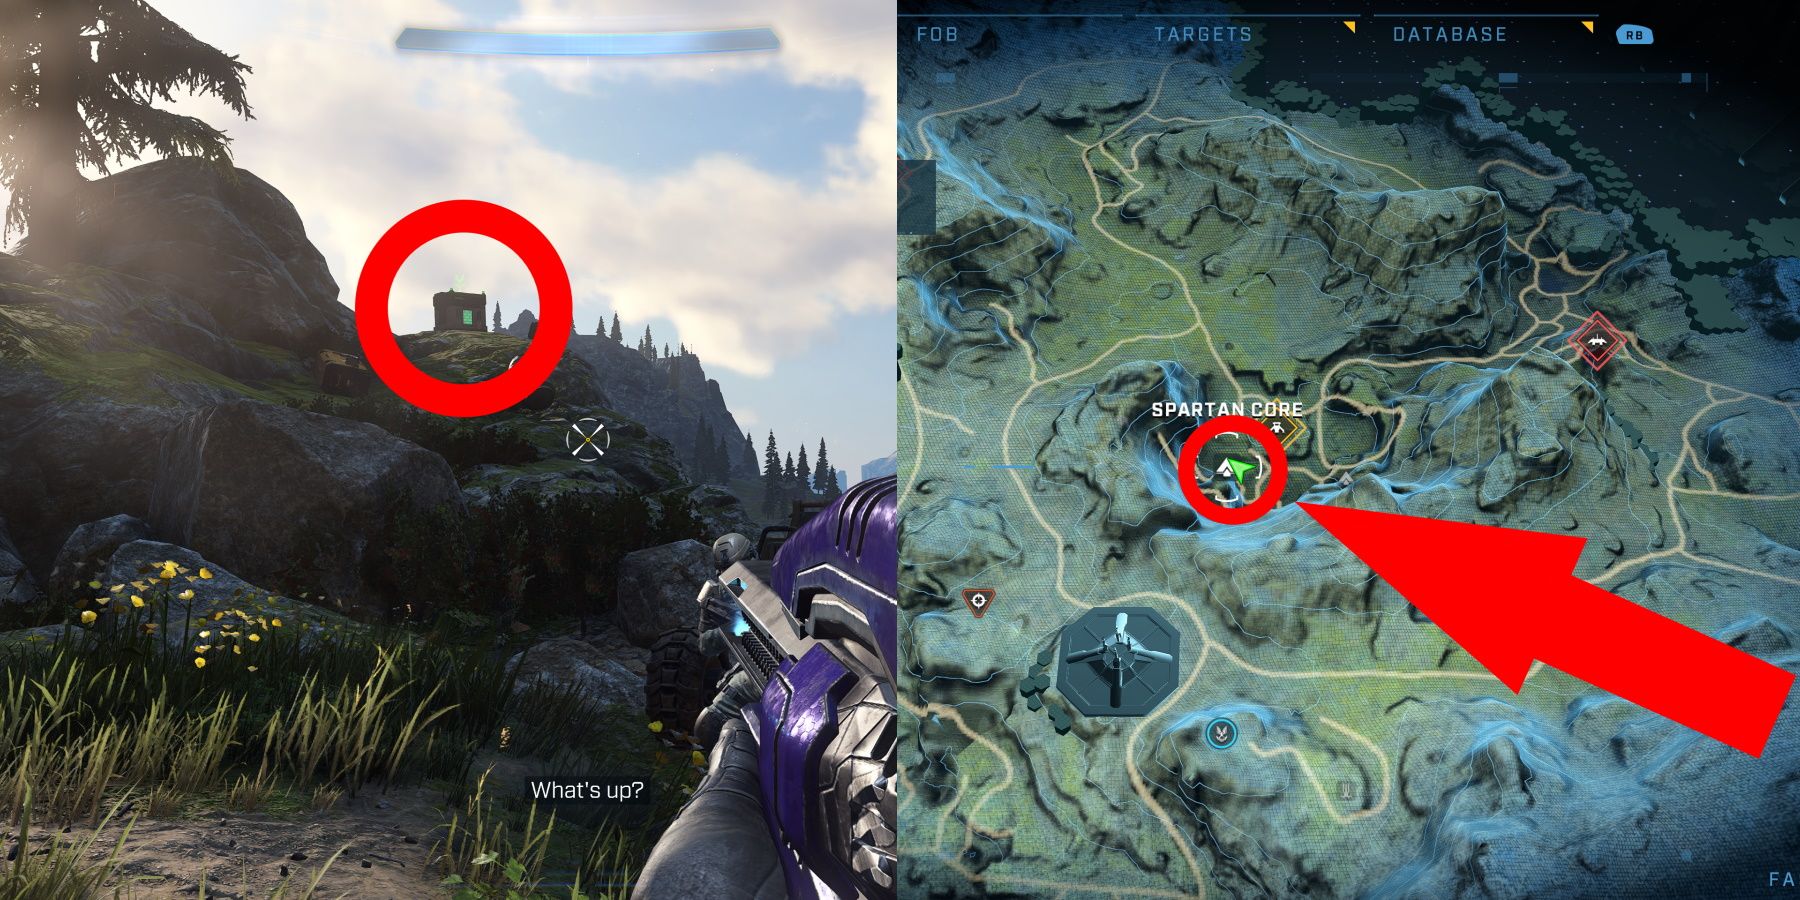 Halo Infinite Excavation Site Spartan Core Location 2 circled in game and on map